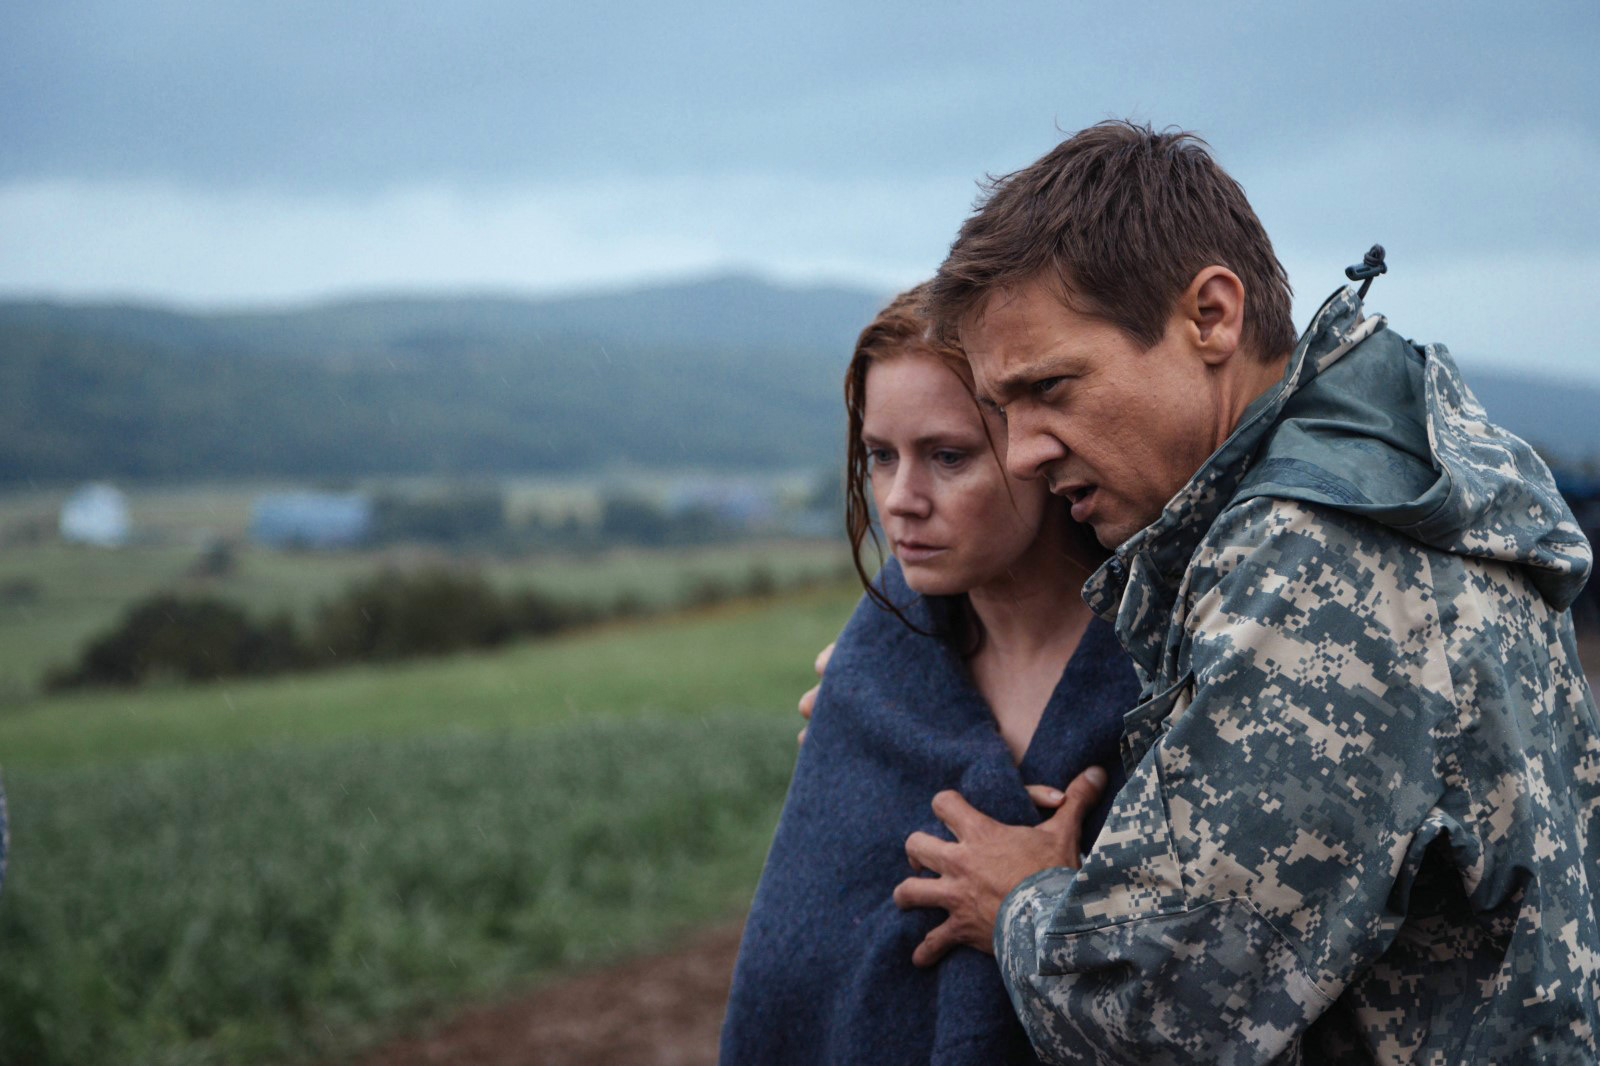 arrival-movie-amy-adams-jeremy-renner-forest-whitaker-1